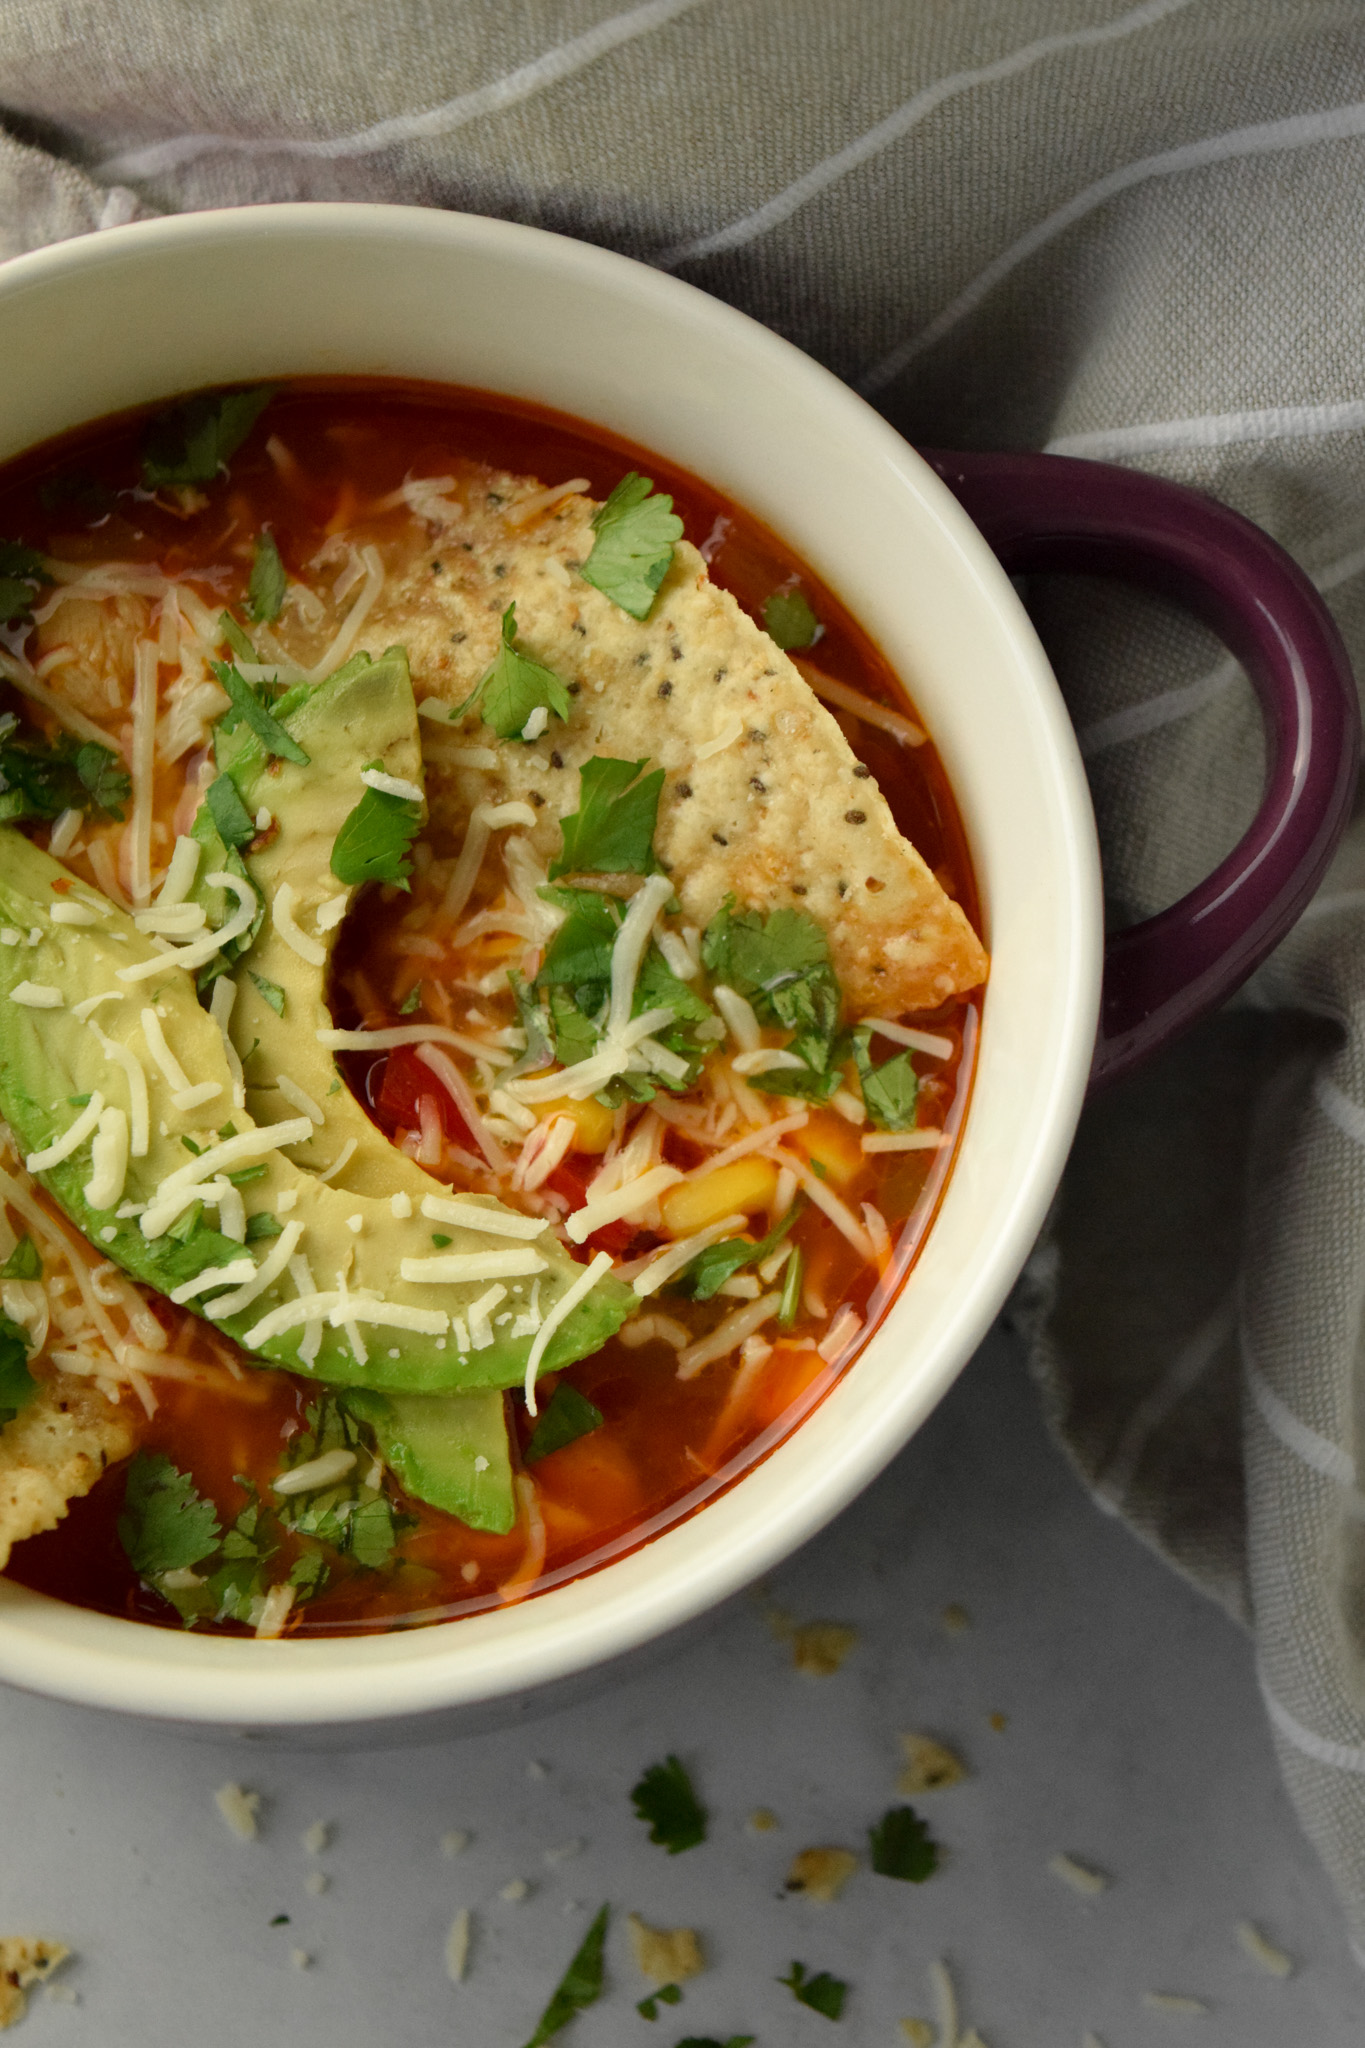 Crock of Chicken Tortilla Soup with Tortilla Chips, Avocado, Cilantro, and Shredded cheese